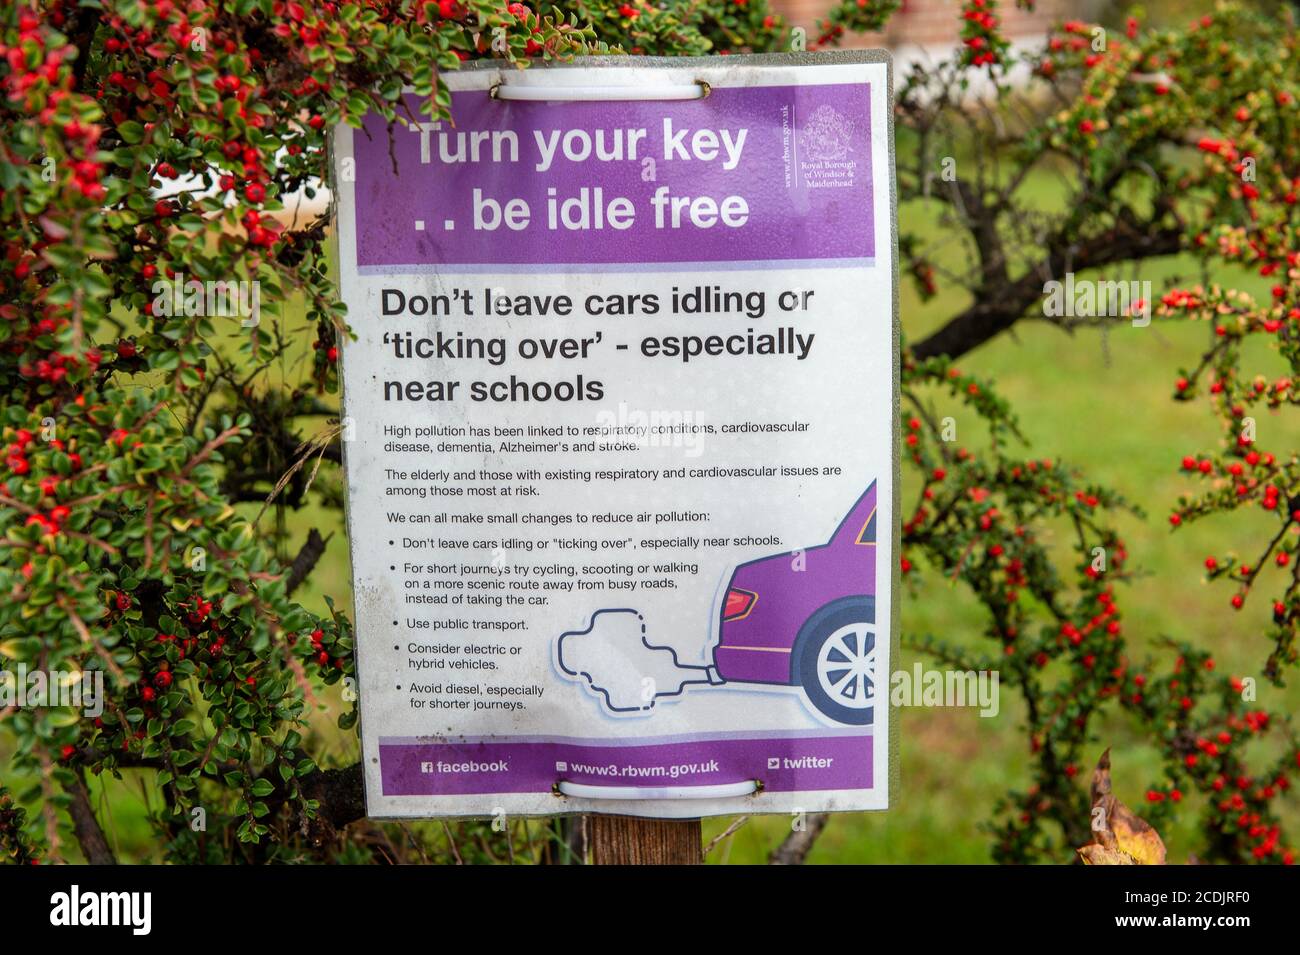 Windsor, Berkshire, UK. 28th August, 2020.  A notice near a school asking drivers not to leave their cars idling or ticking over especially near schools. Credit: Maureen McLean/Alamy Stock Photo